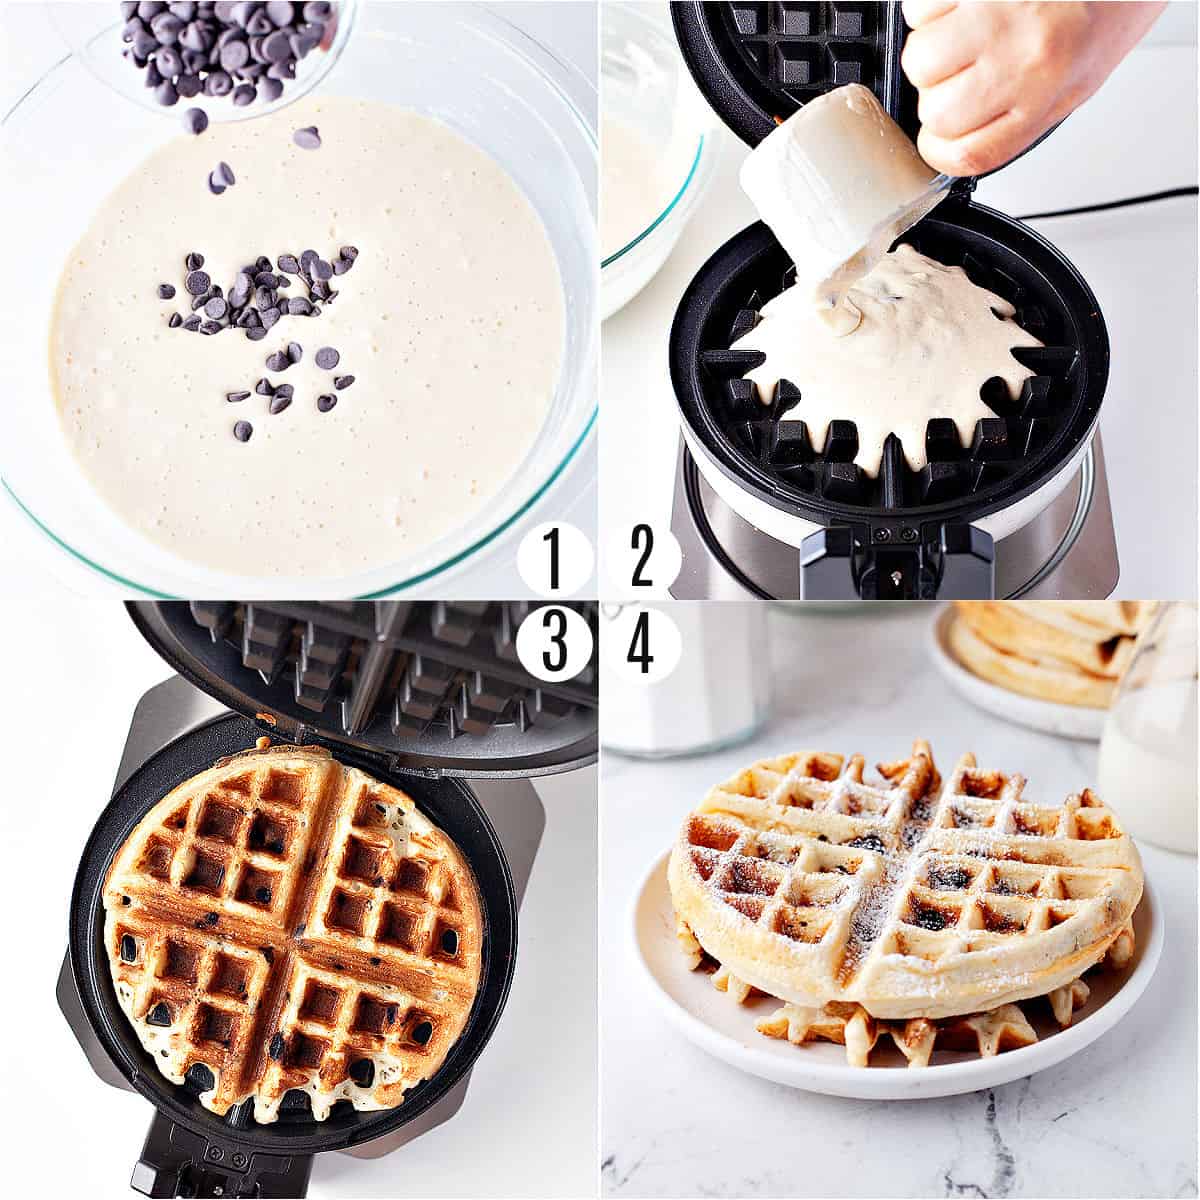 Step by step photos showing how to make chocolate chip waffles.